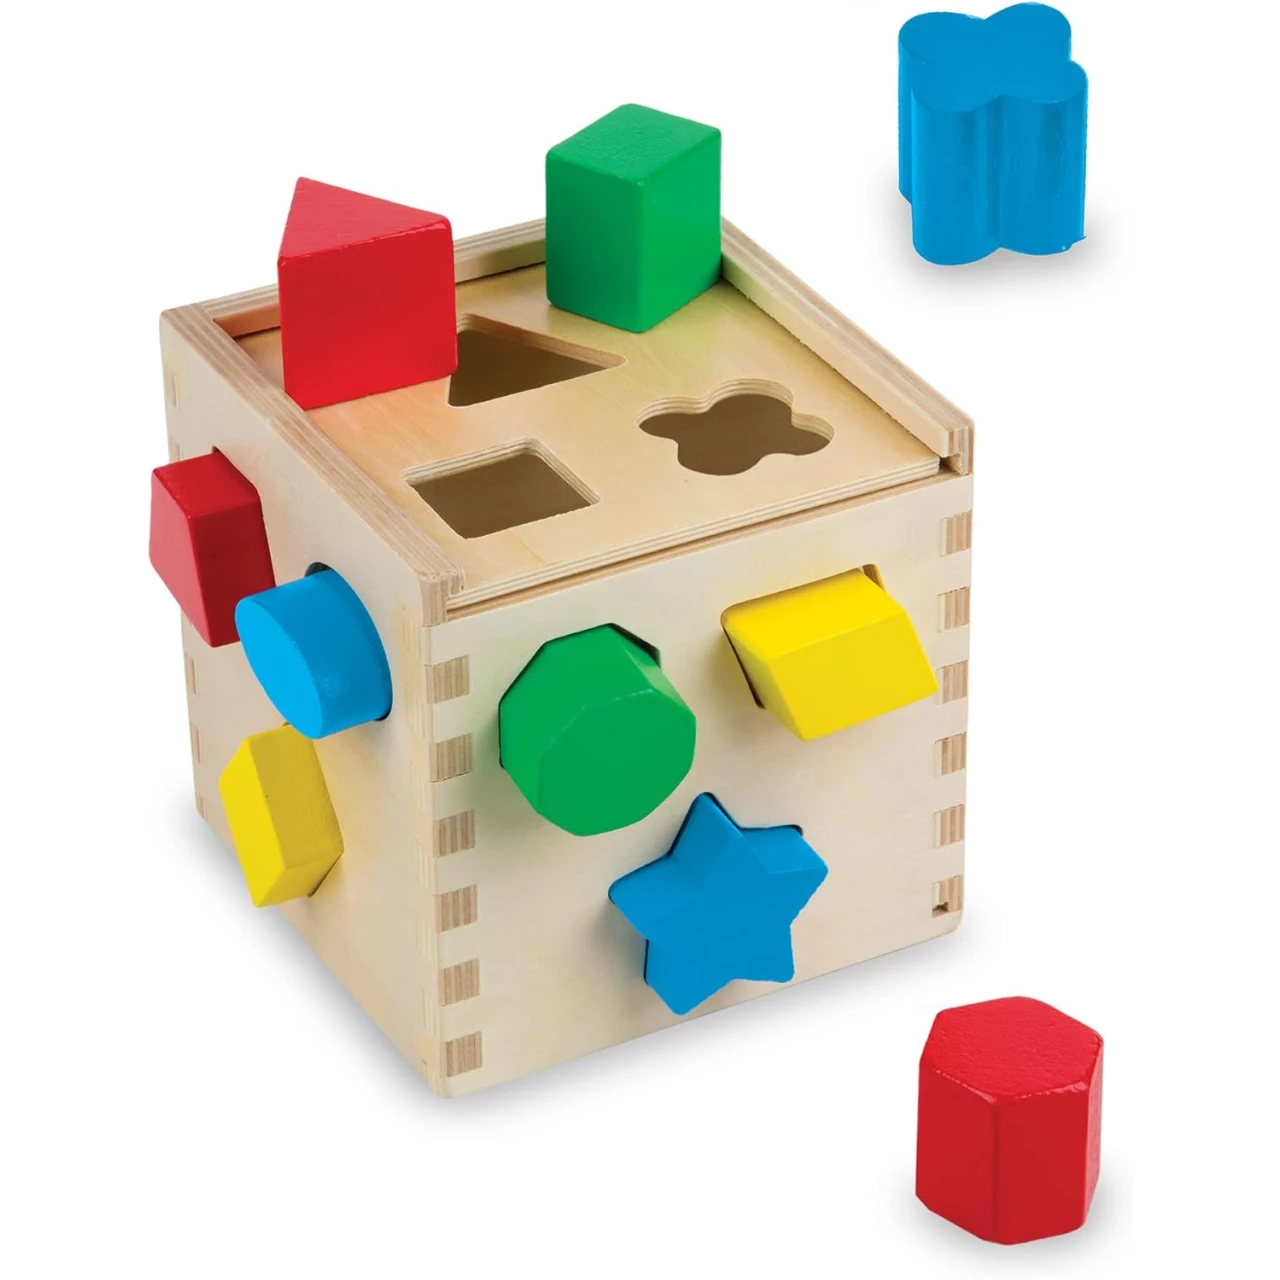 Melissa &amp; Doug Shape Sorting Cube - Classic Wooden Toy With 12 Shapes - Kids Shape Sorter Toys For Toddlers Ages 2+